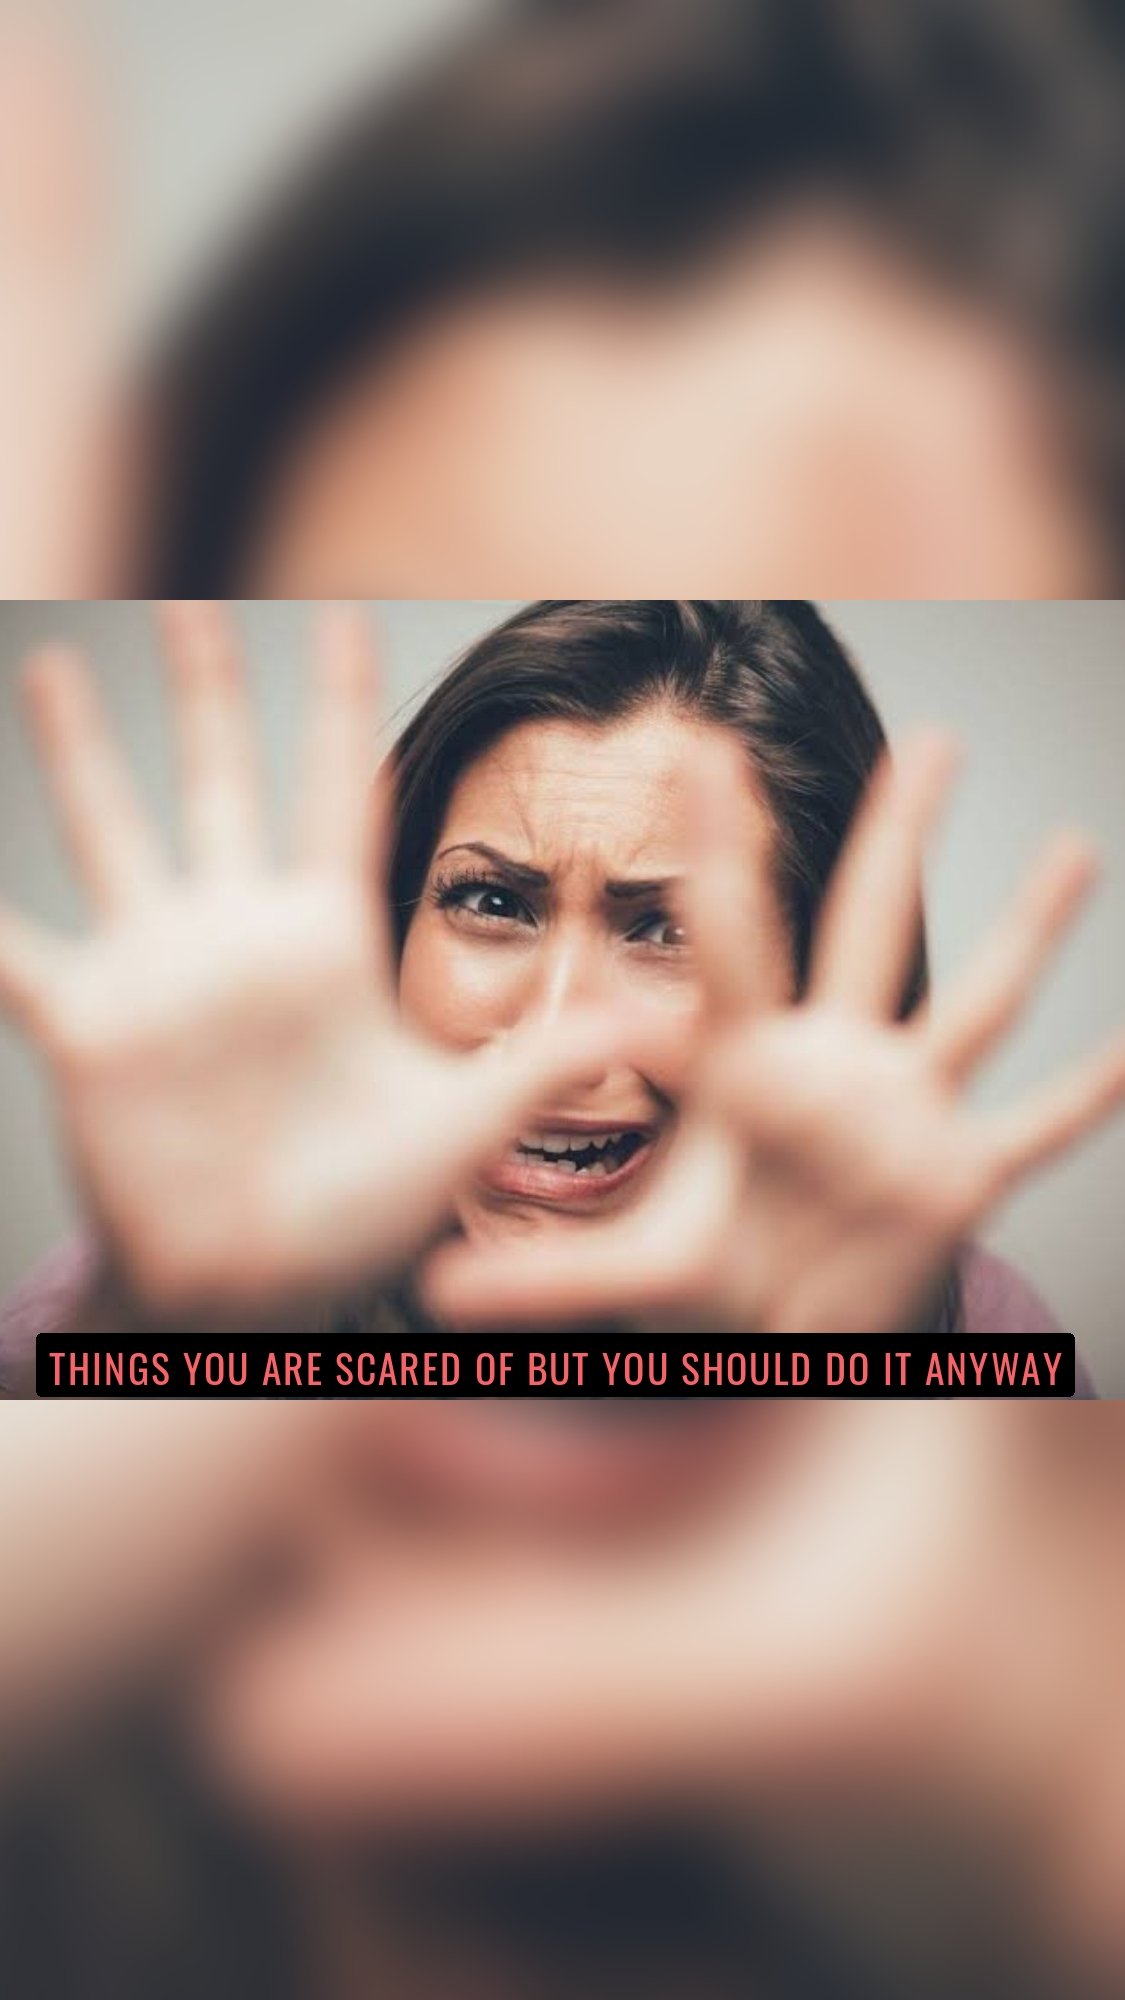 Things you are scared of but you should do it anyway